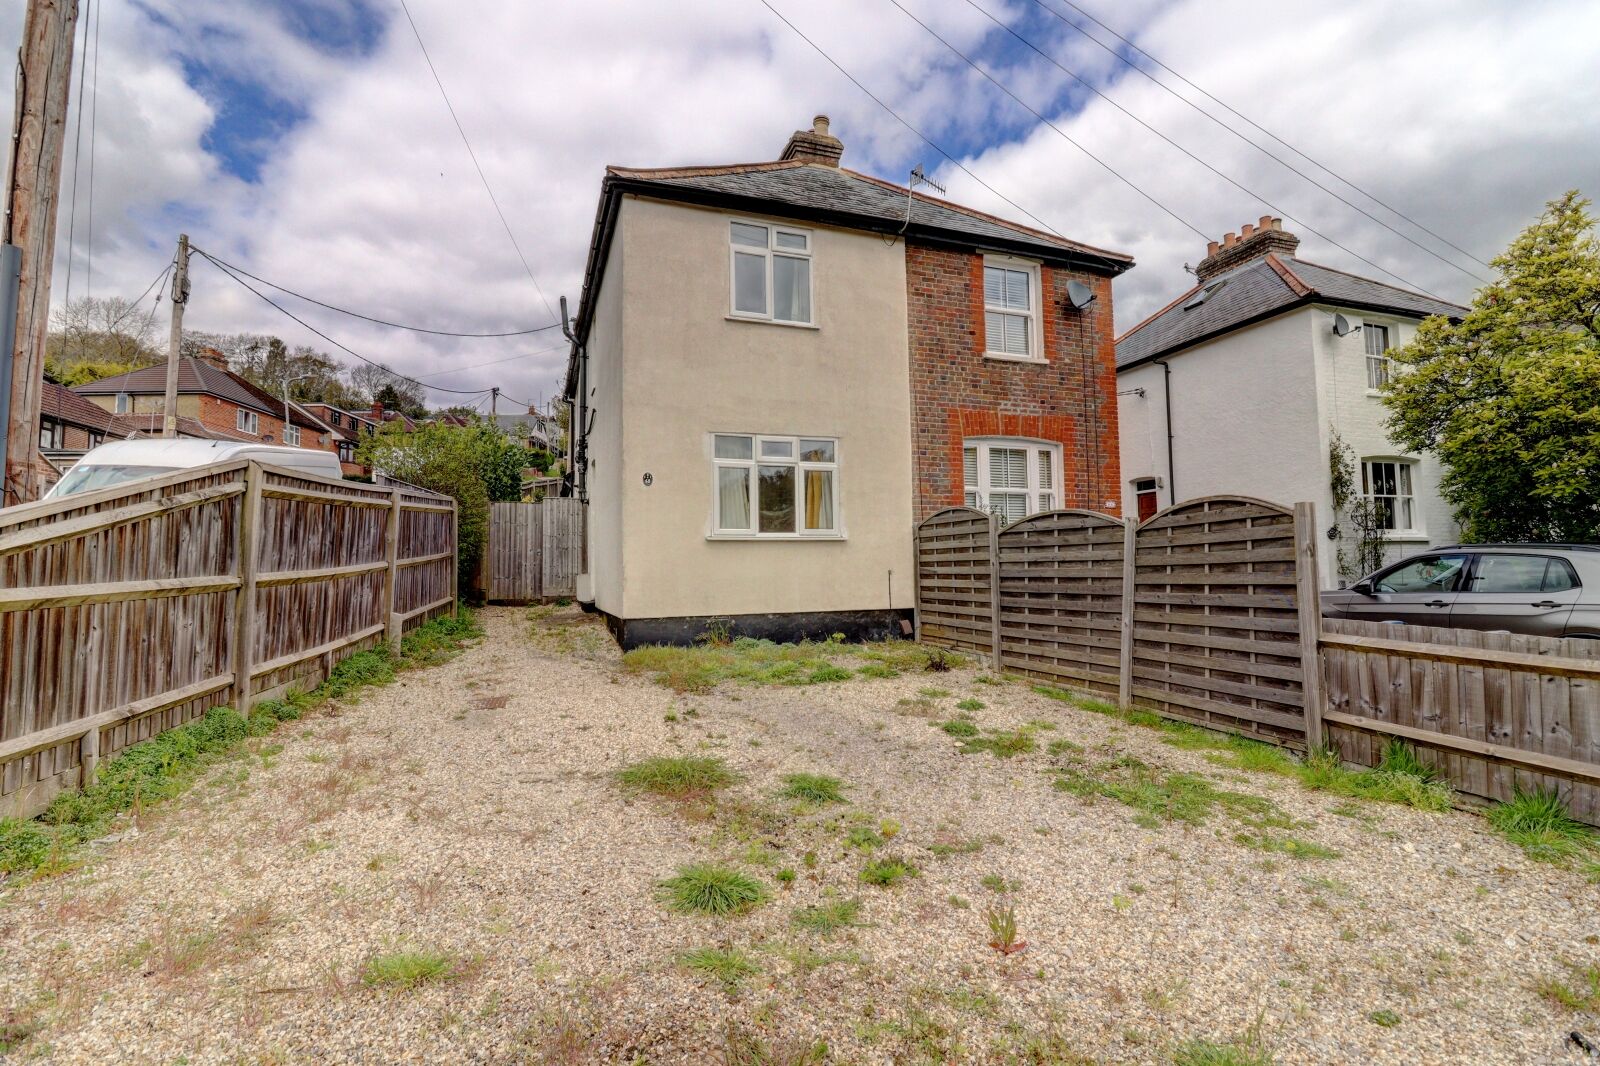 2 bedroom semi detached house for sale Lane End Road, High Wycombe, HP12, main image